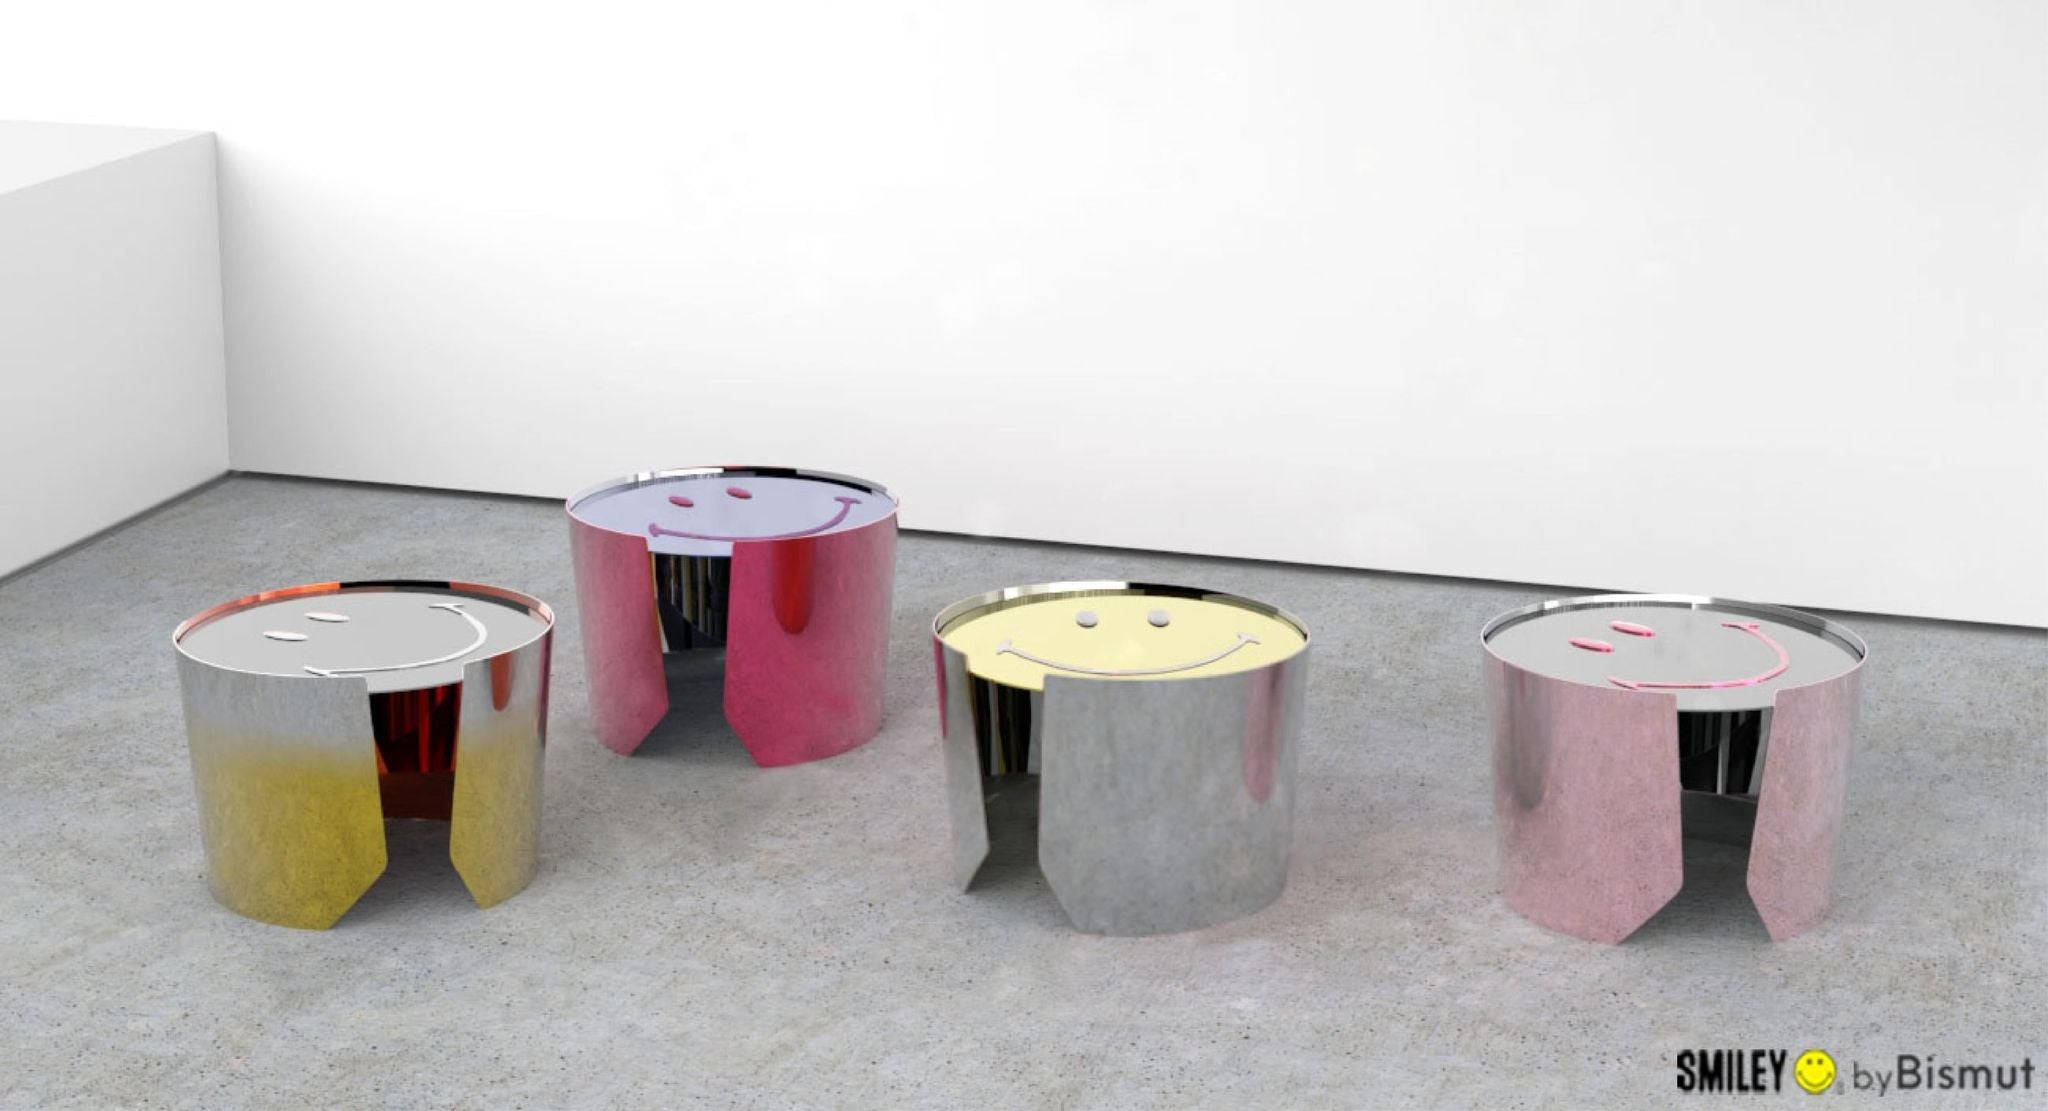 Bismut & Bismut x Smiley tables which are based on Bismut’s Drum collection, with a circular top surrounded by a metal cuff.